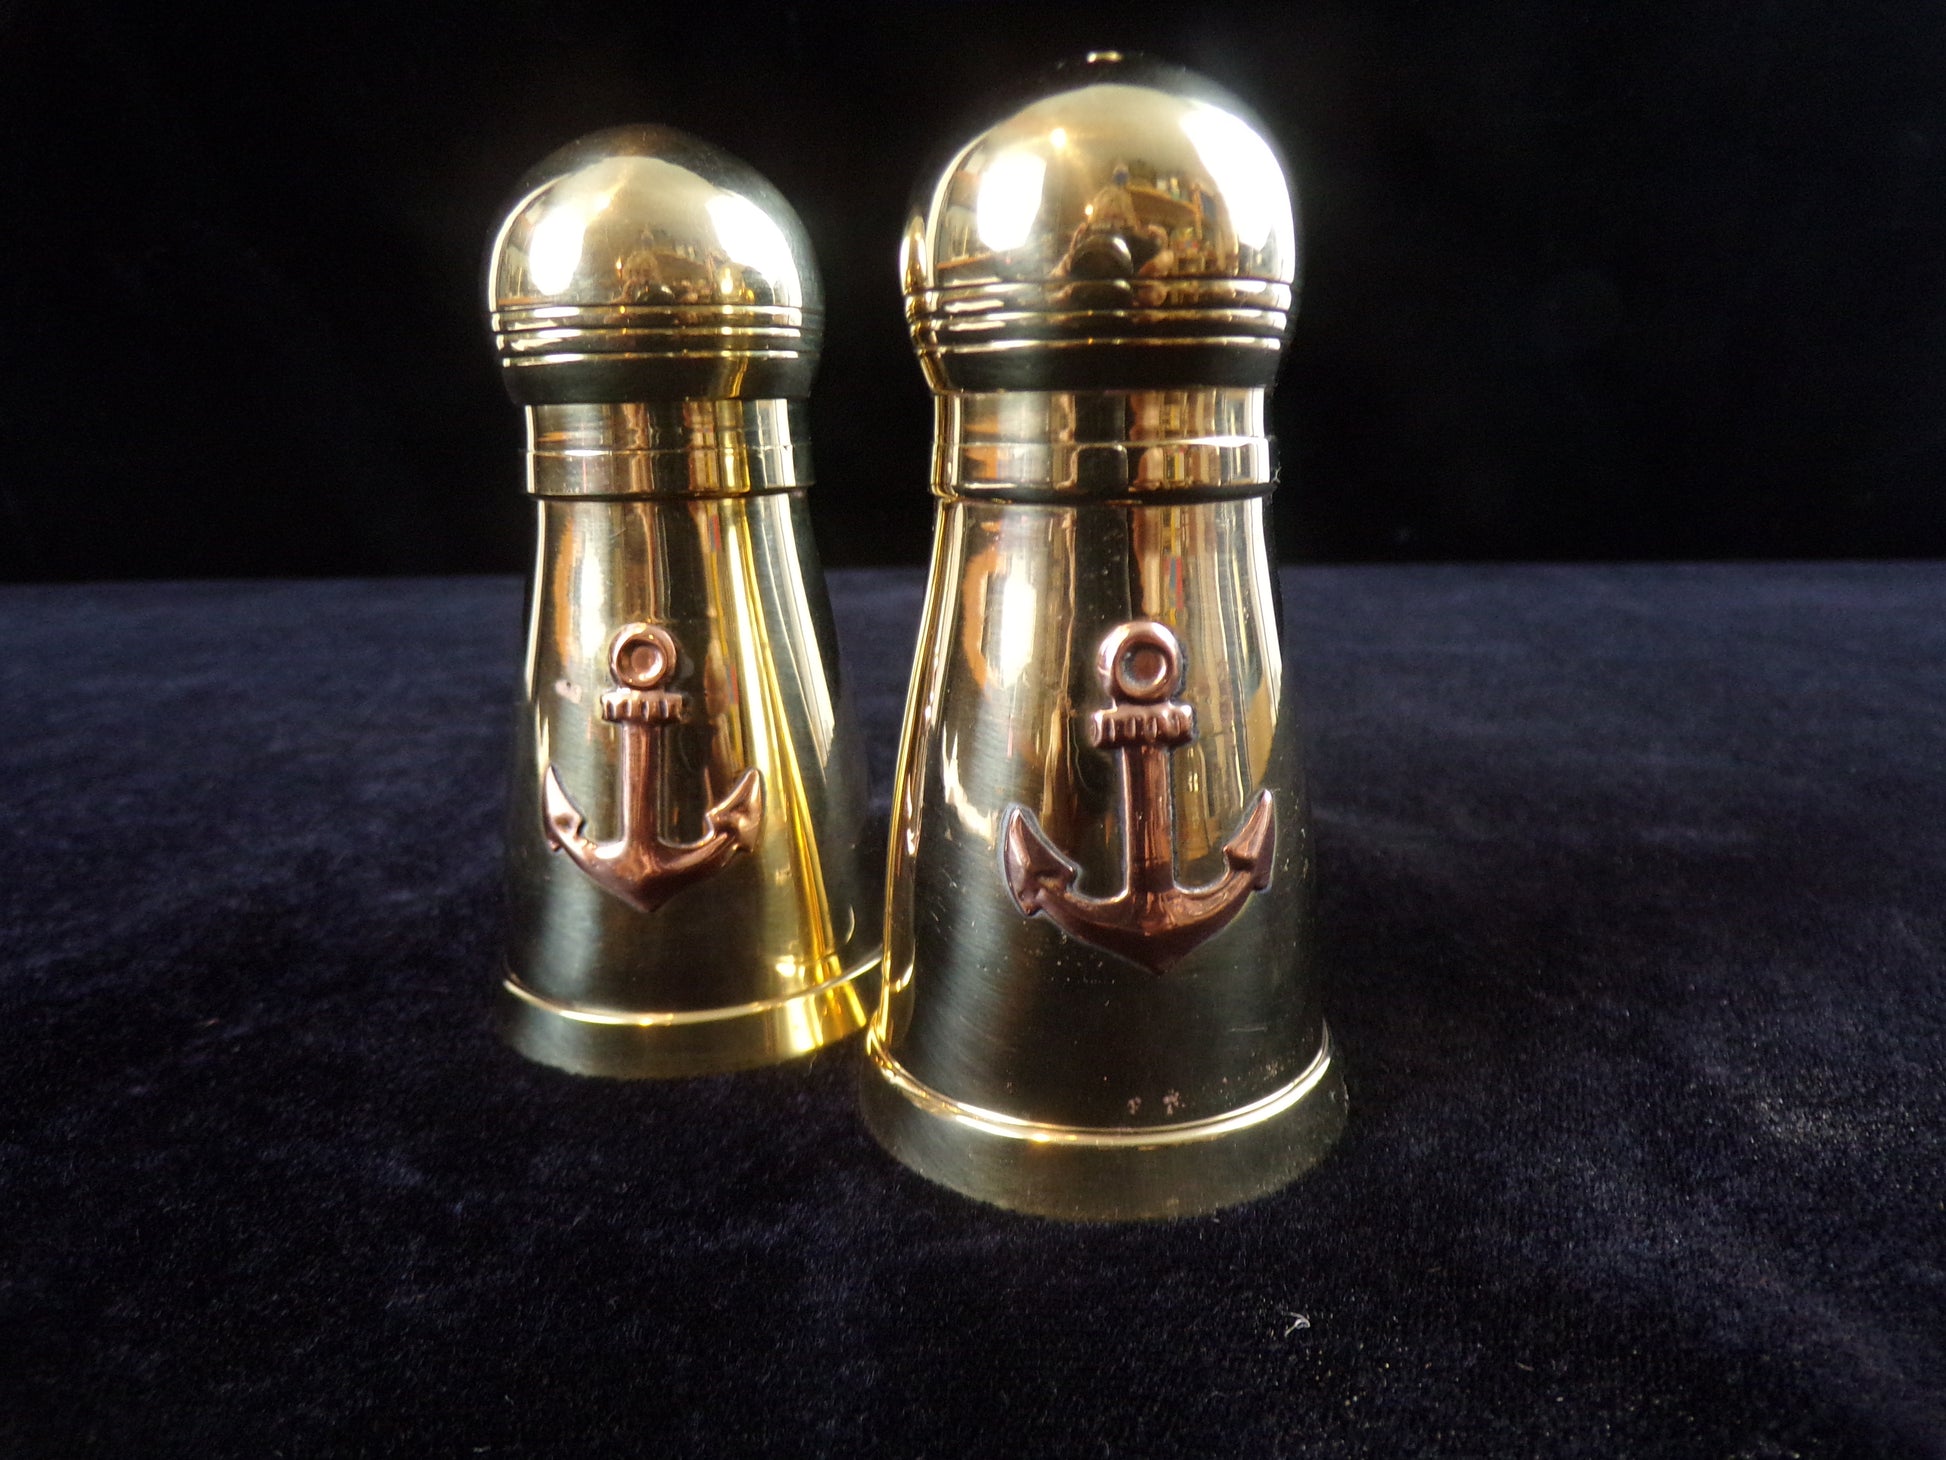 Best Salt & Pepper Shakers on a Boat - The Boat Galley